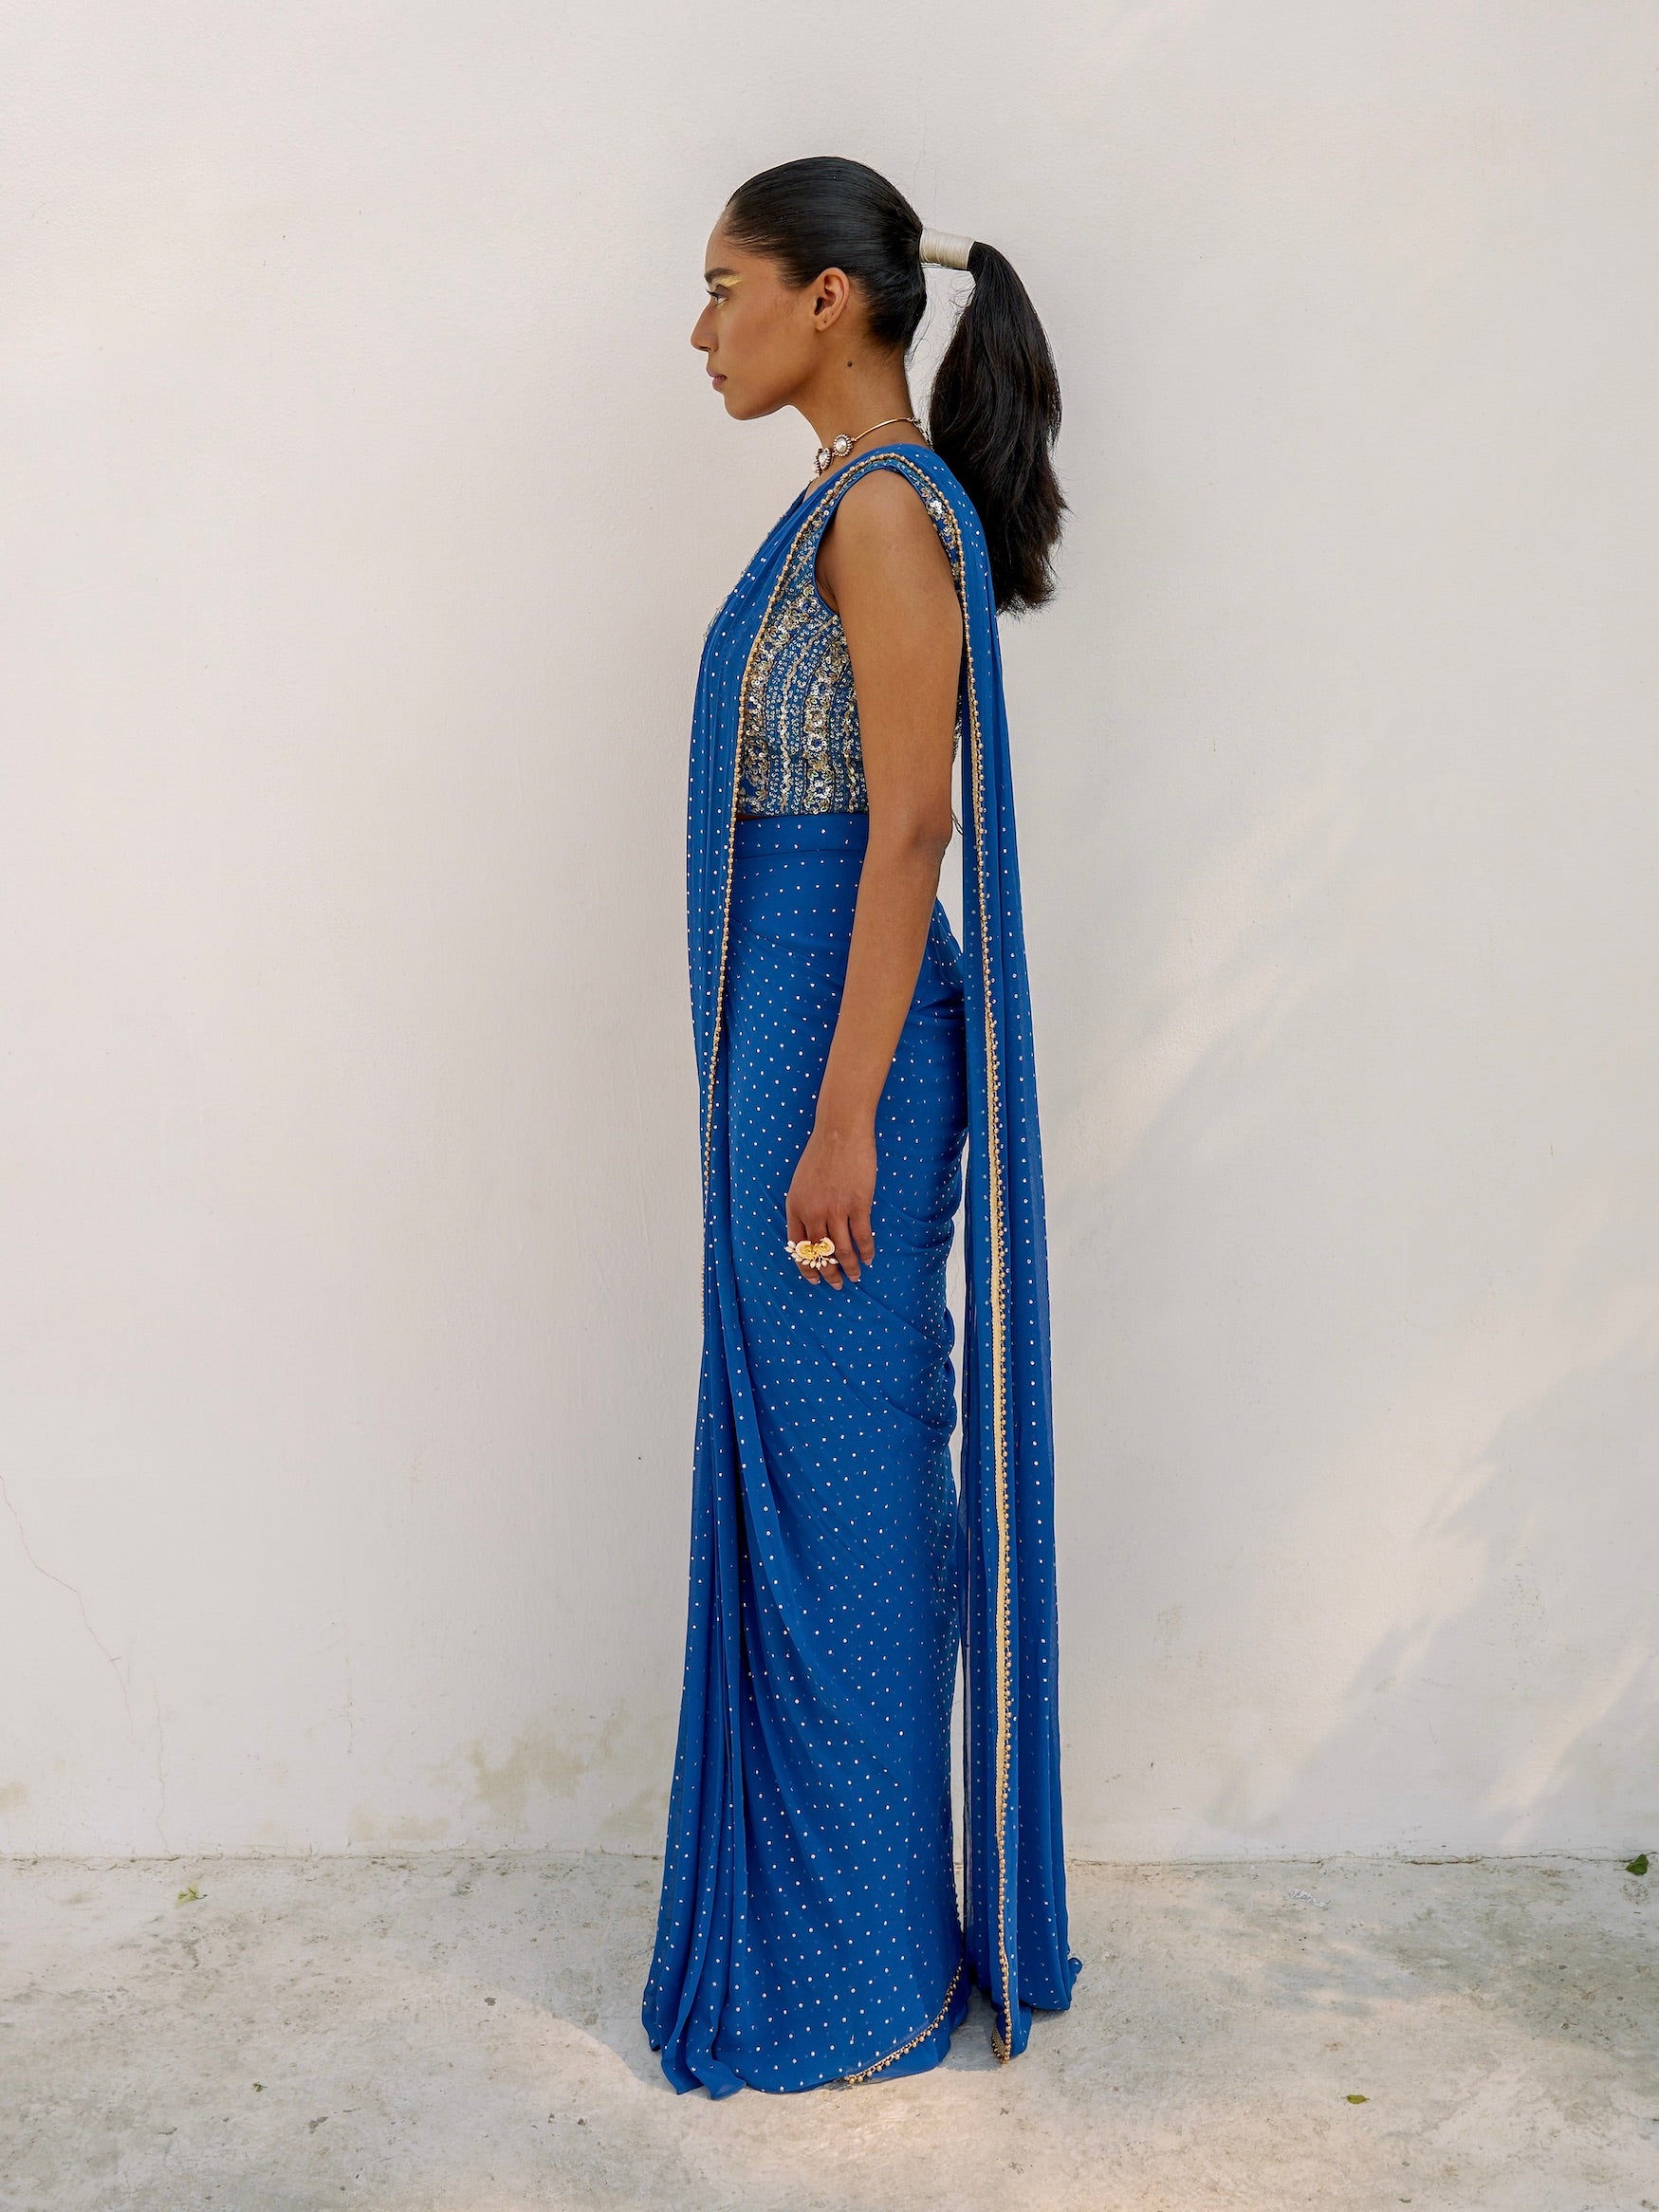 Pre-Draped Sarees That Are A Quick Pick For Any Small Bridal